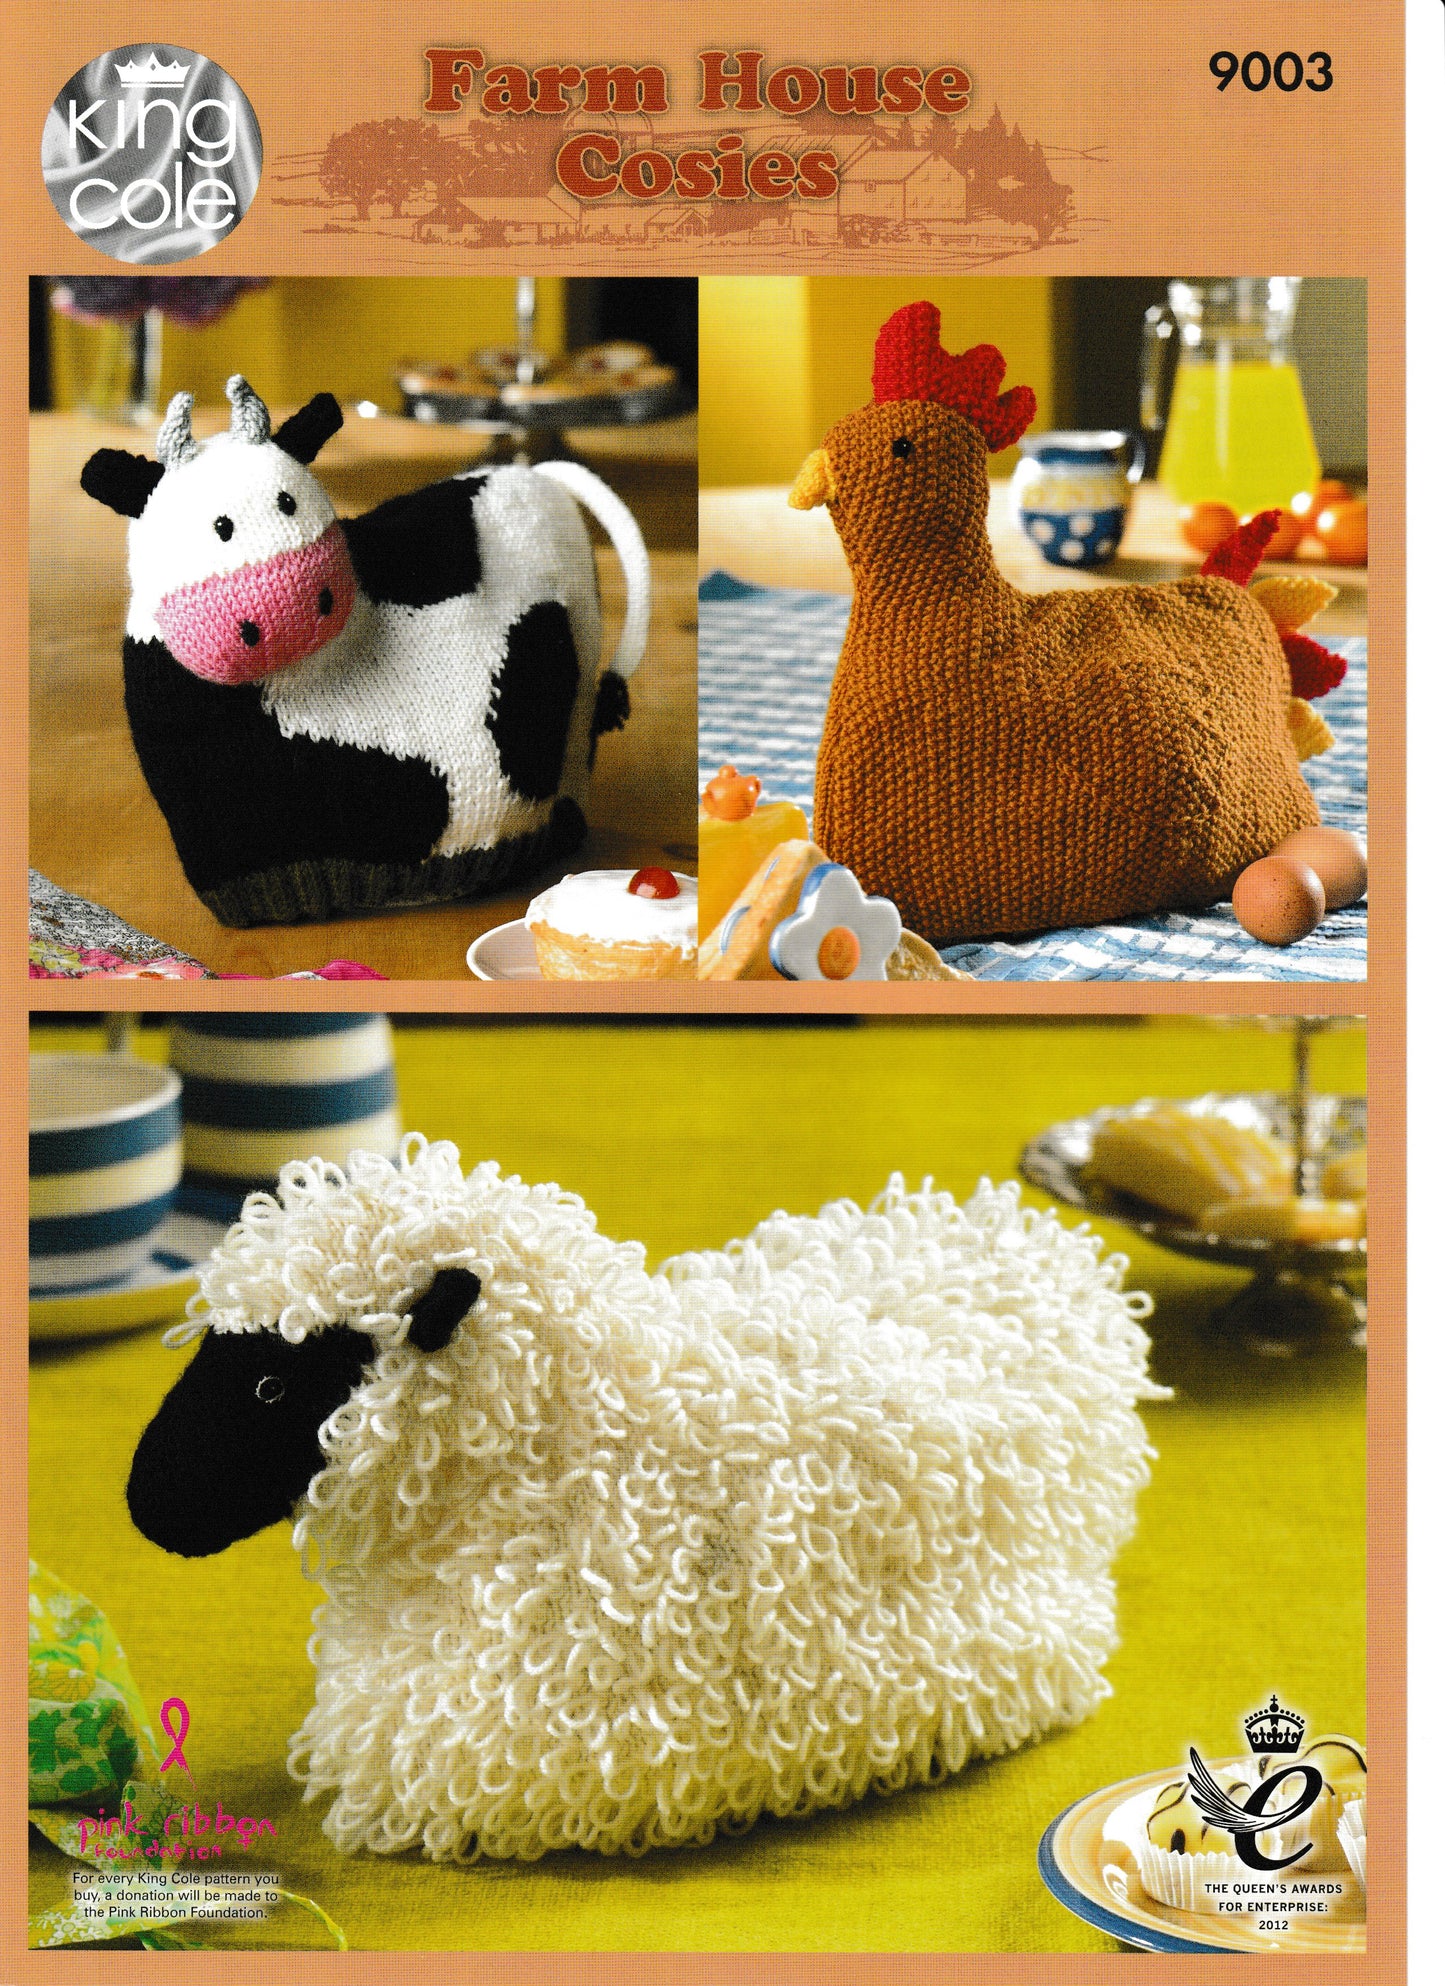 King Cole - Knit Patterns - Farm house Cosies 9003